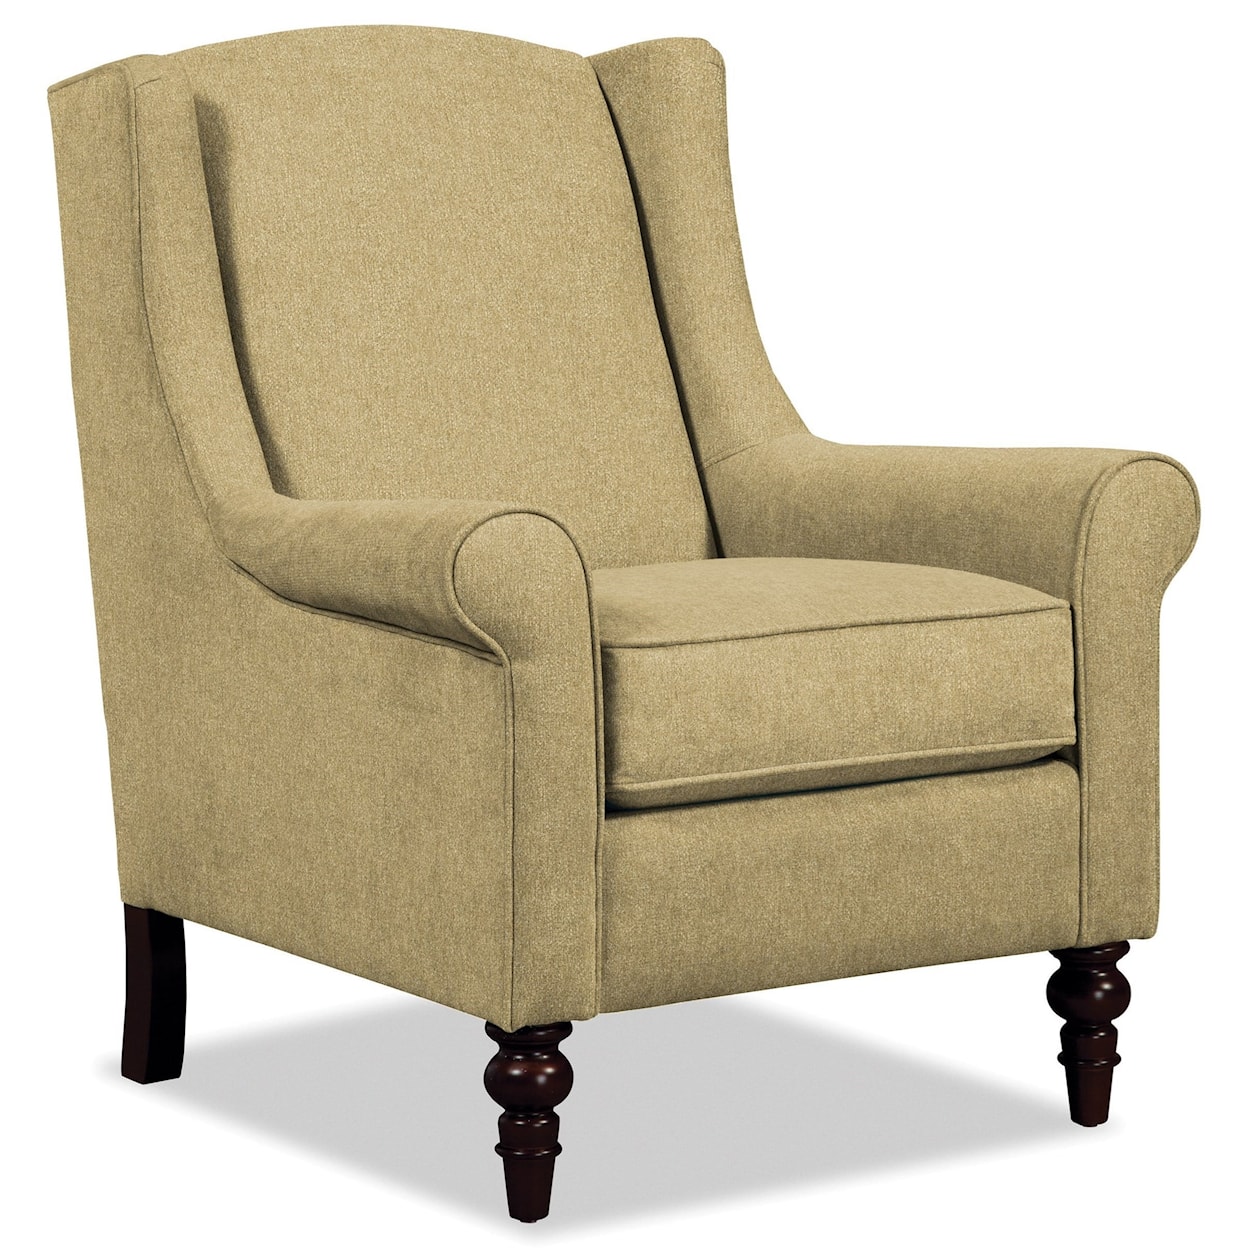 Hickory Craft 058710 Wing Back Chair